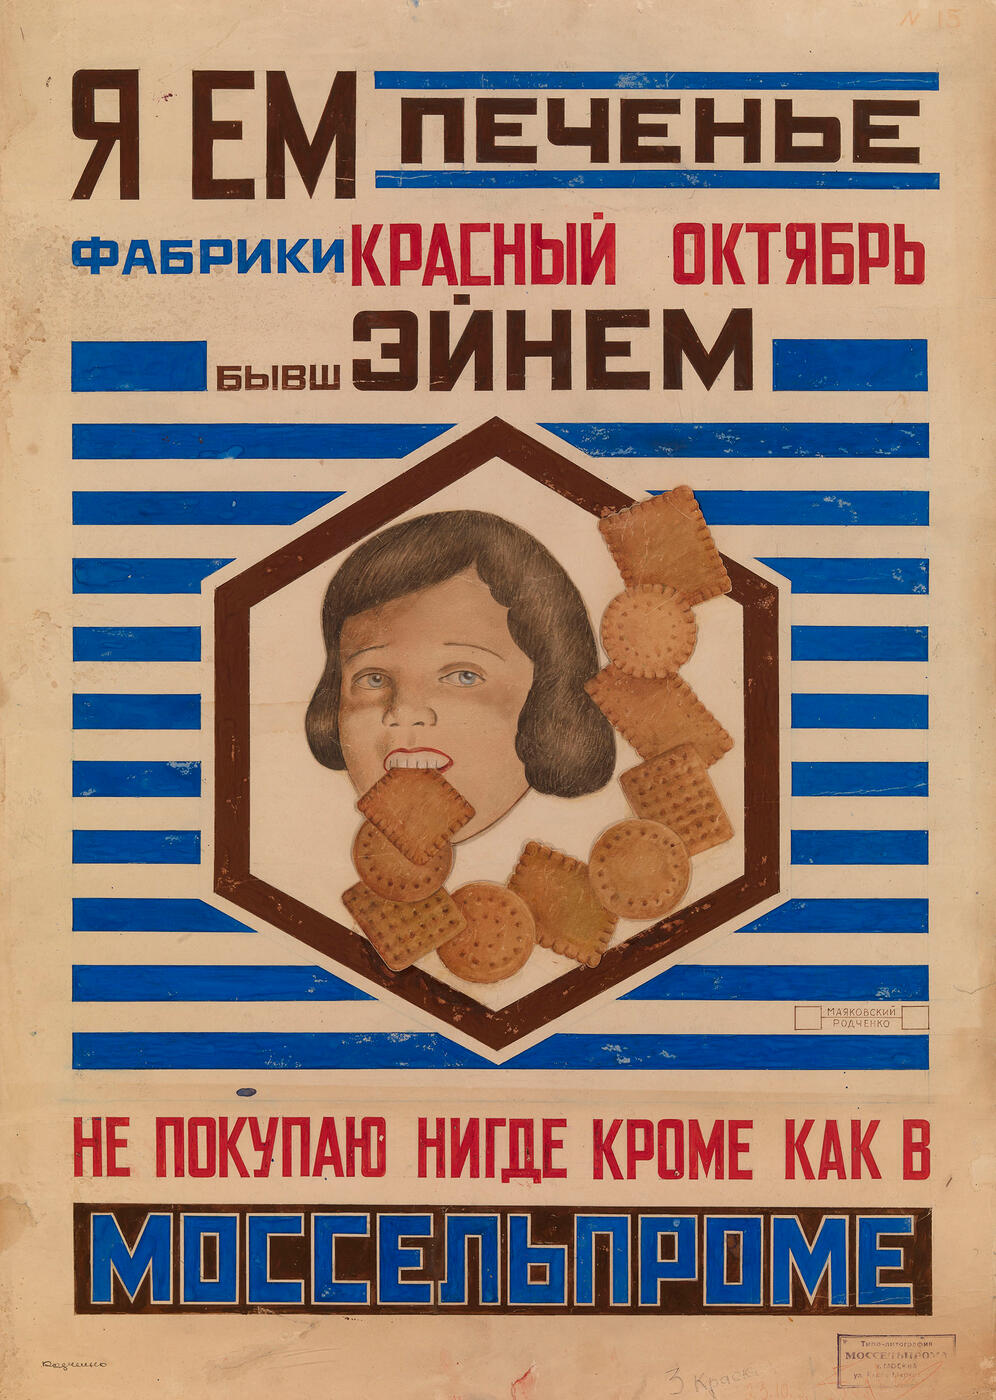 Advertisement for Cookies from the Red October Factory